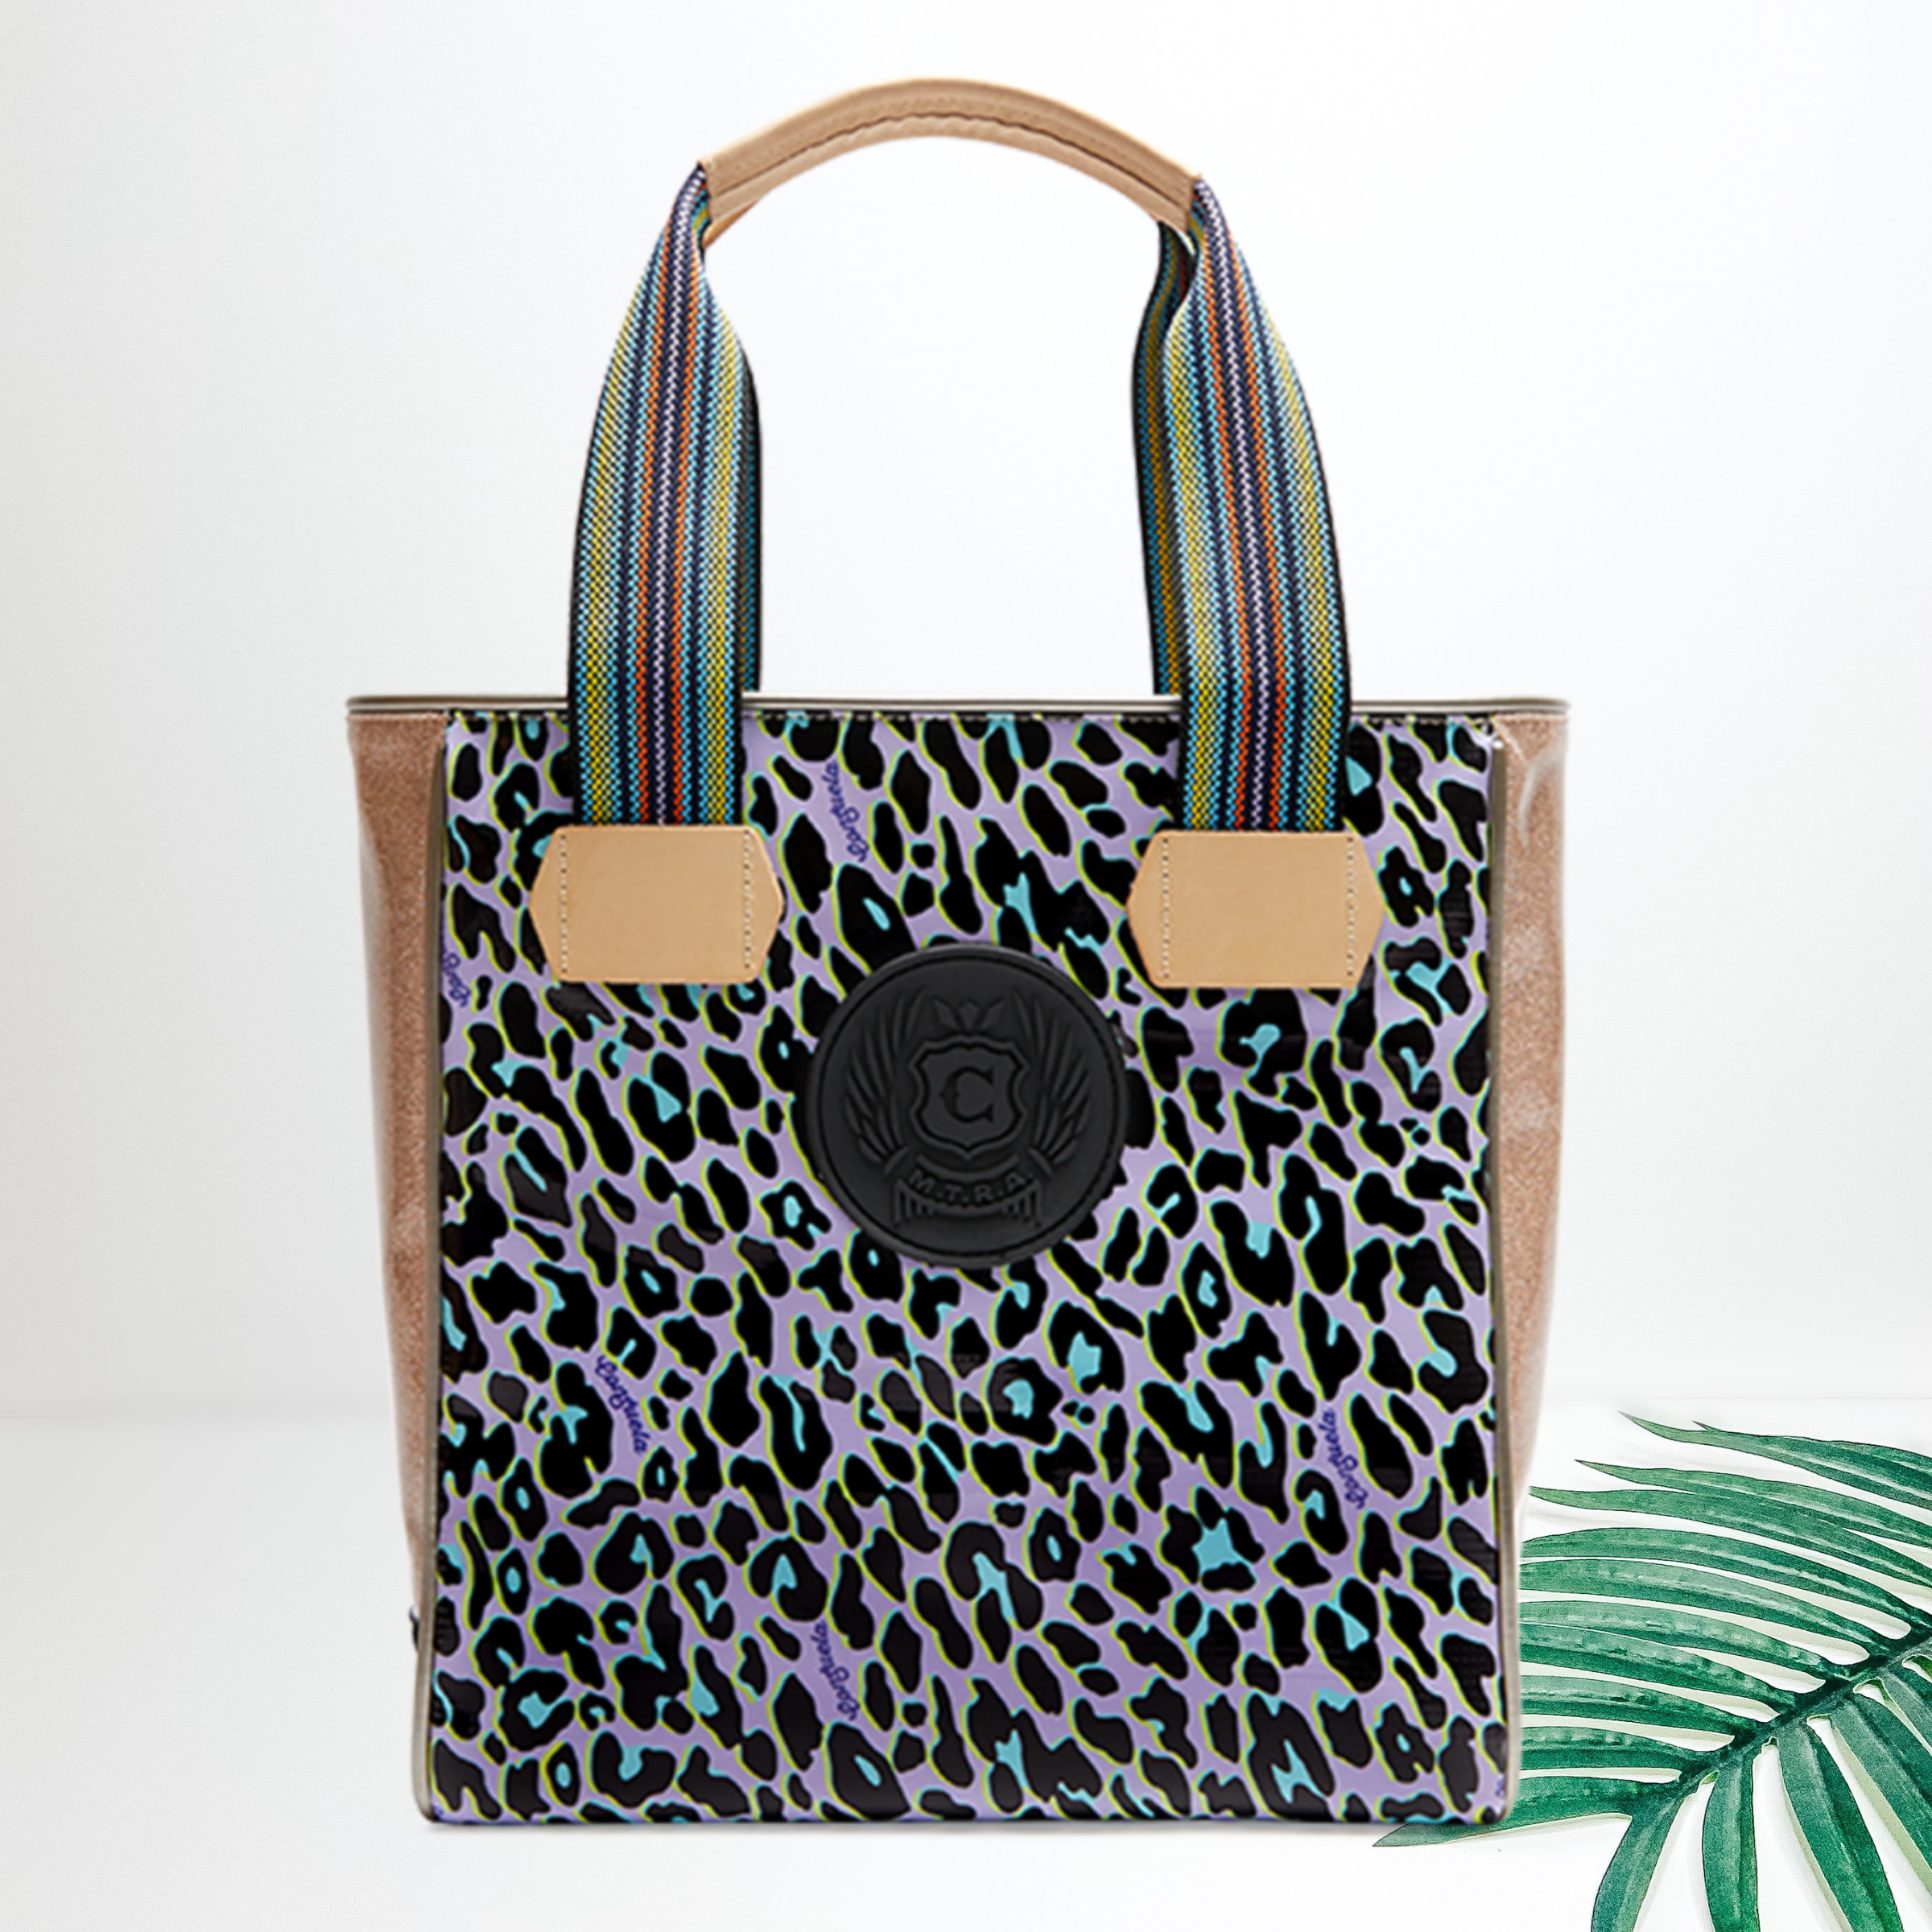 A green and purple leopard print bag with a black patch. Pictured on white background with a palm leaf.